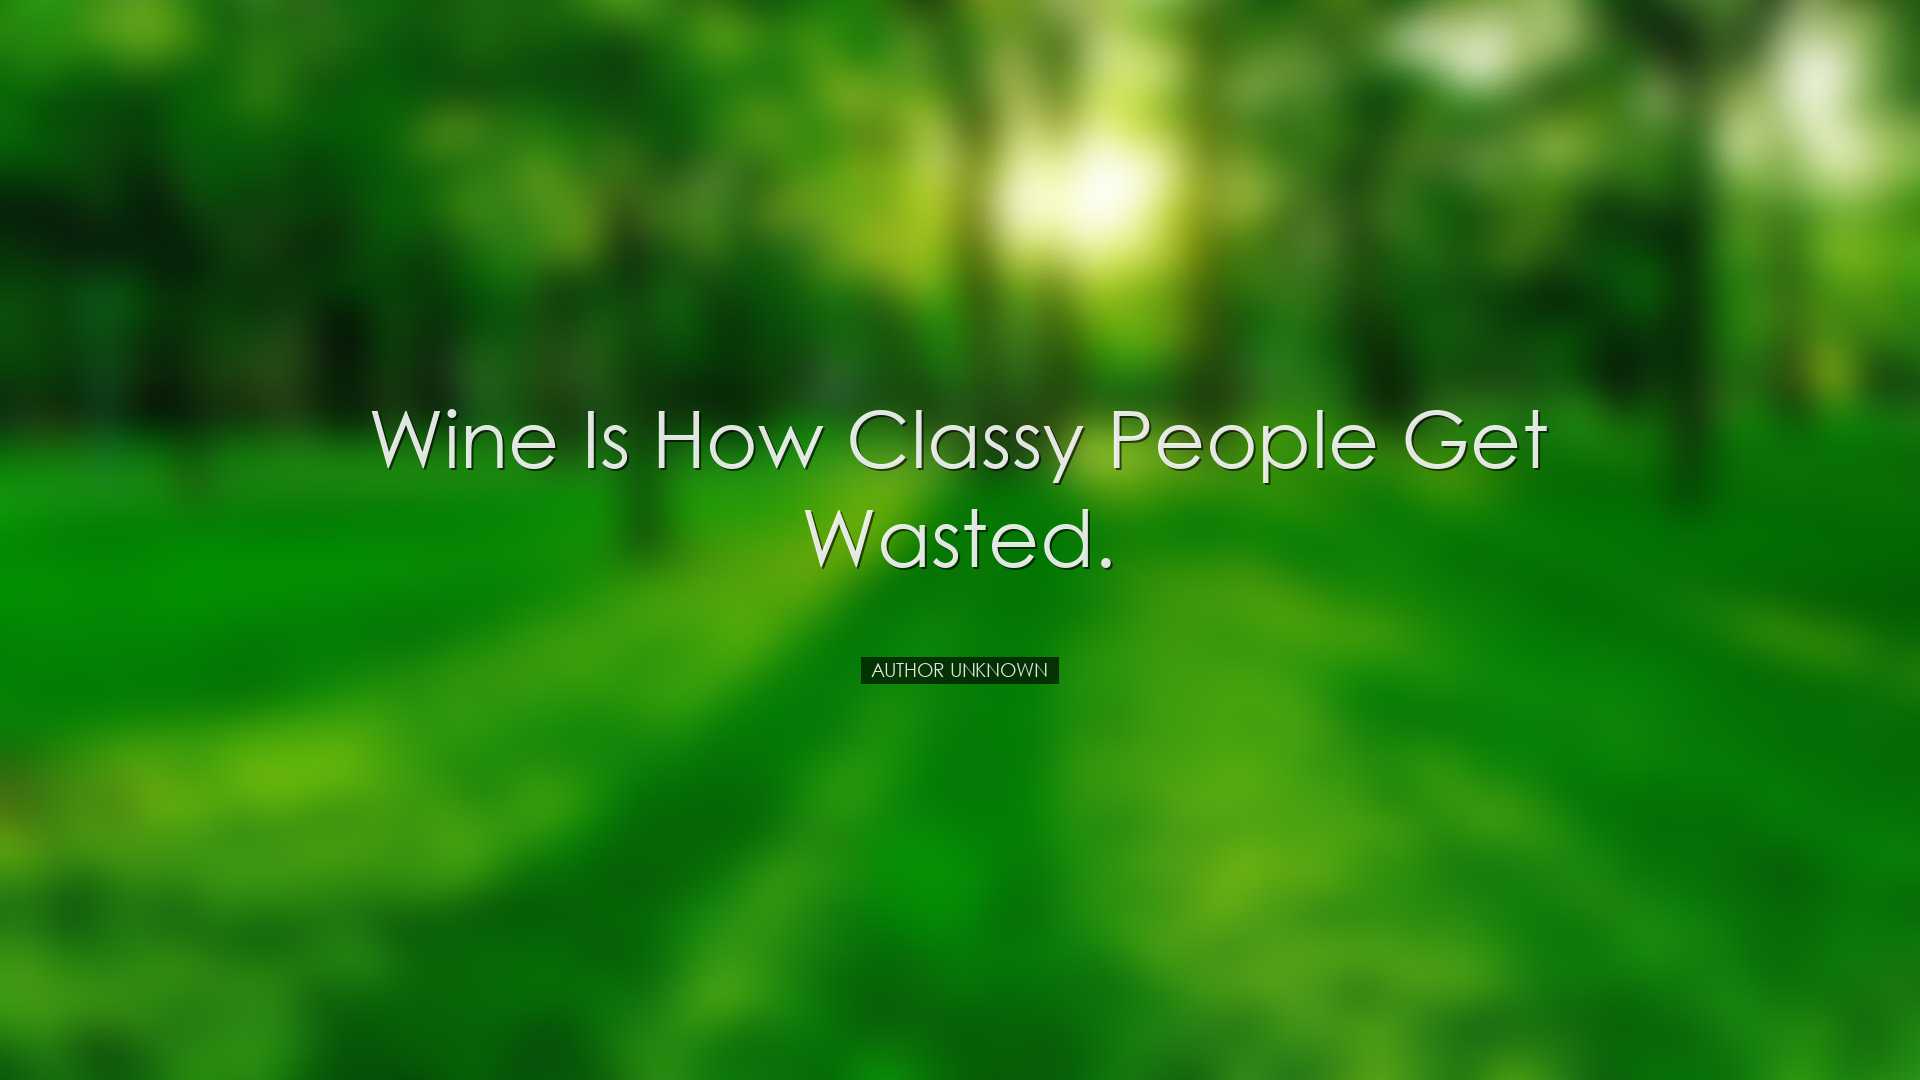 Wine is how classy people get wasted. - Author Unknown